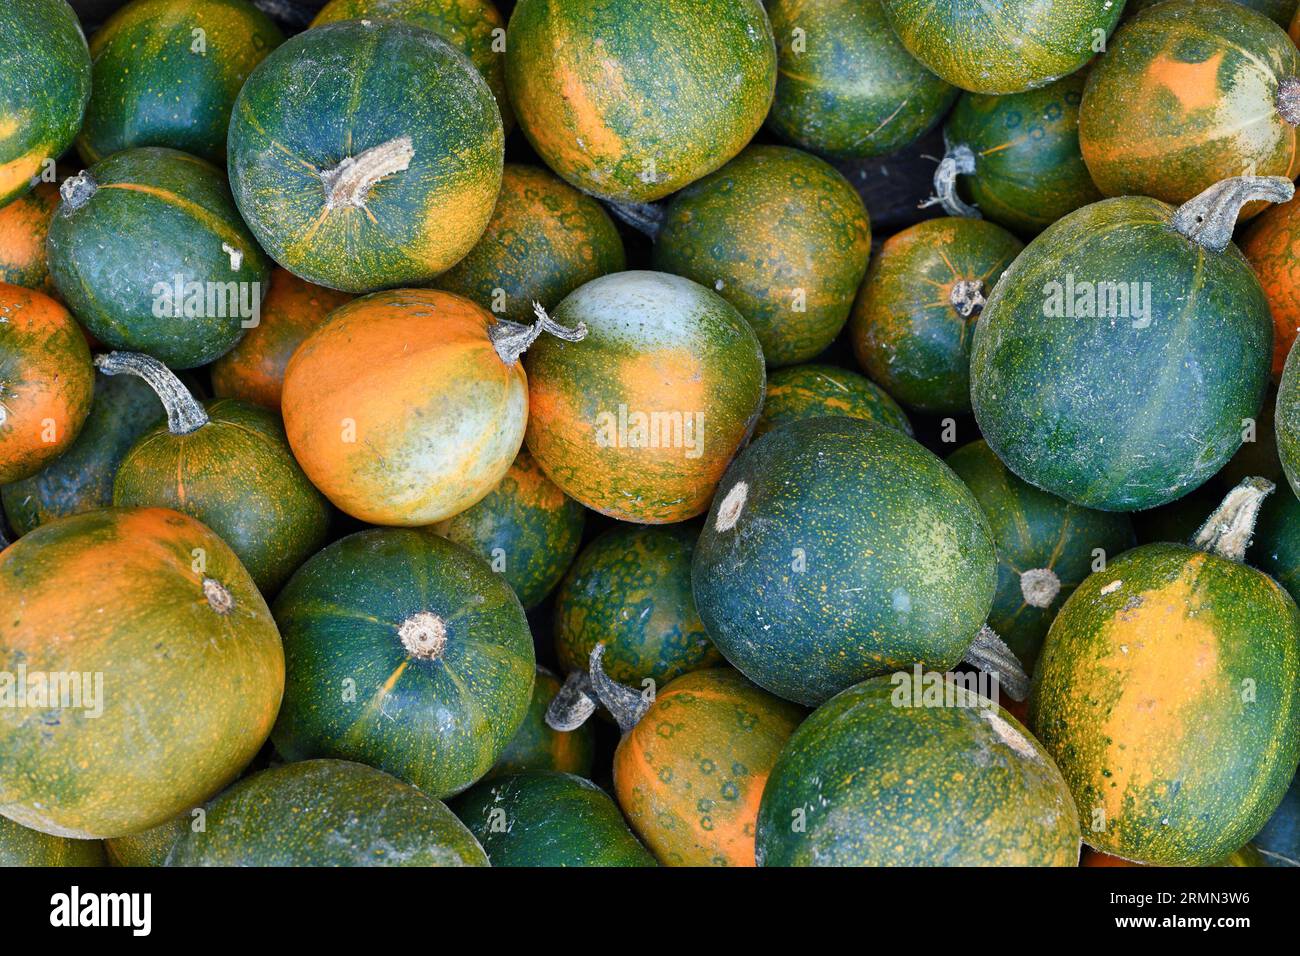 Round green and yellow Rondini Gem squash on pile Stock Photo